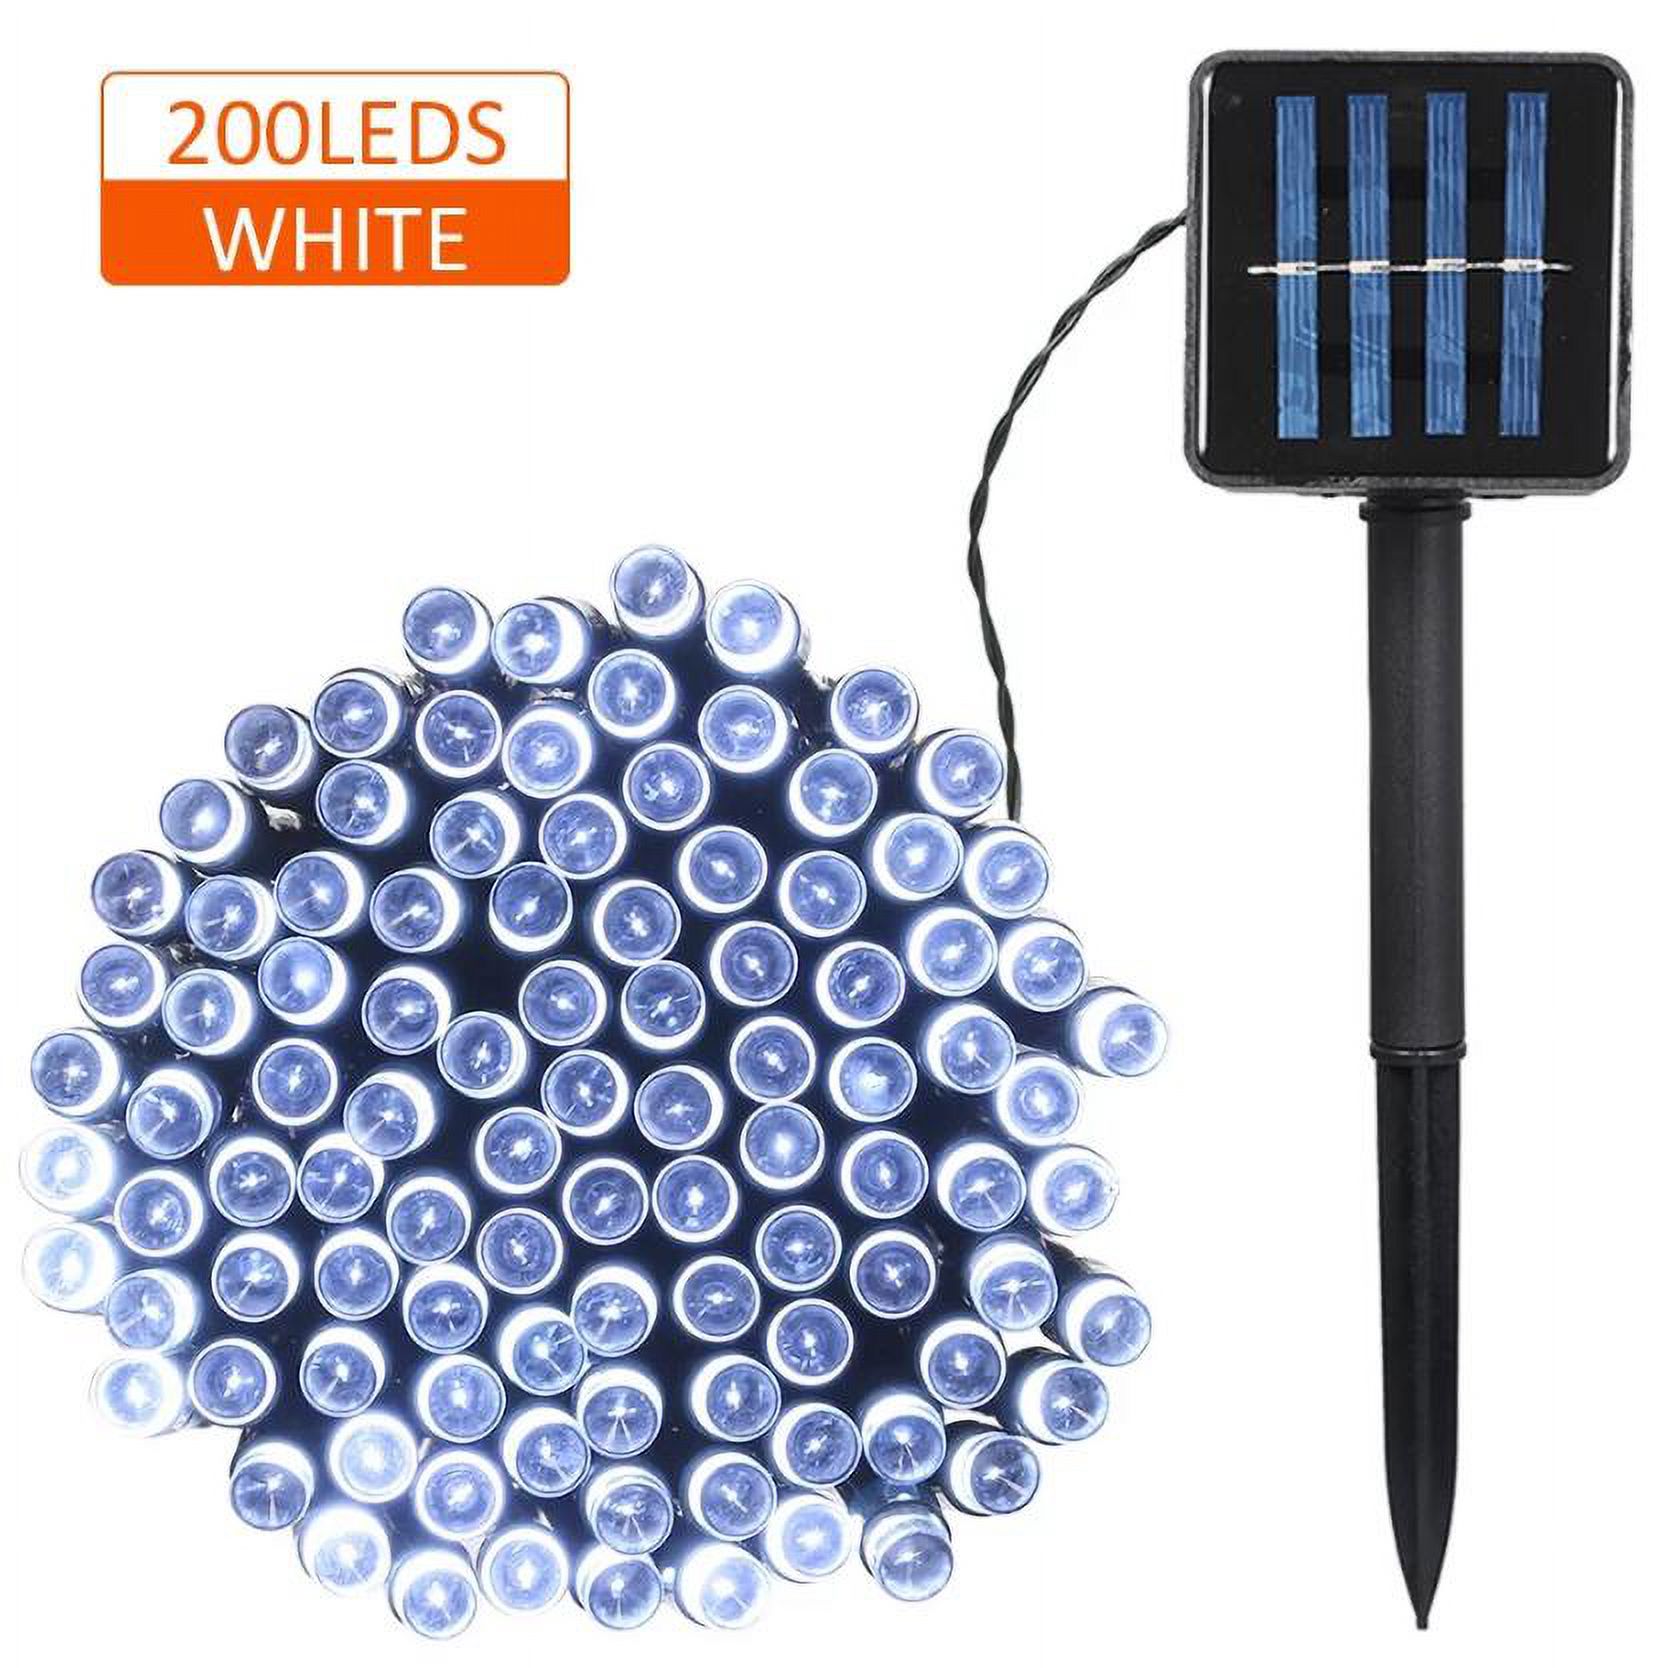 Mixfeer Solar Powered String Lights 200 LEDs 2 Lighting Modes IP65 Water-Resistant for Holiday Party Garden White - image 1 of 7